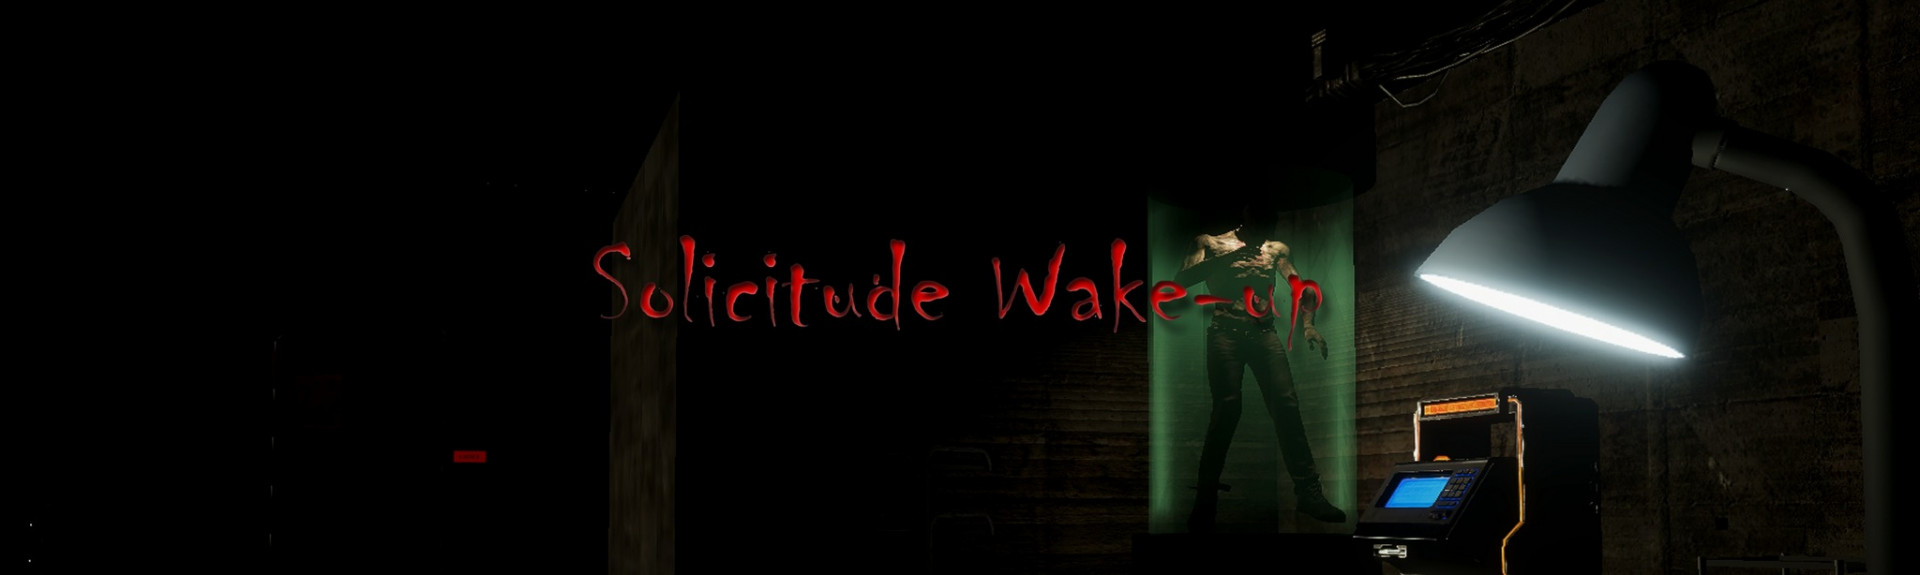 Solicitude Wake-up